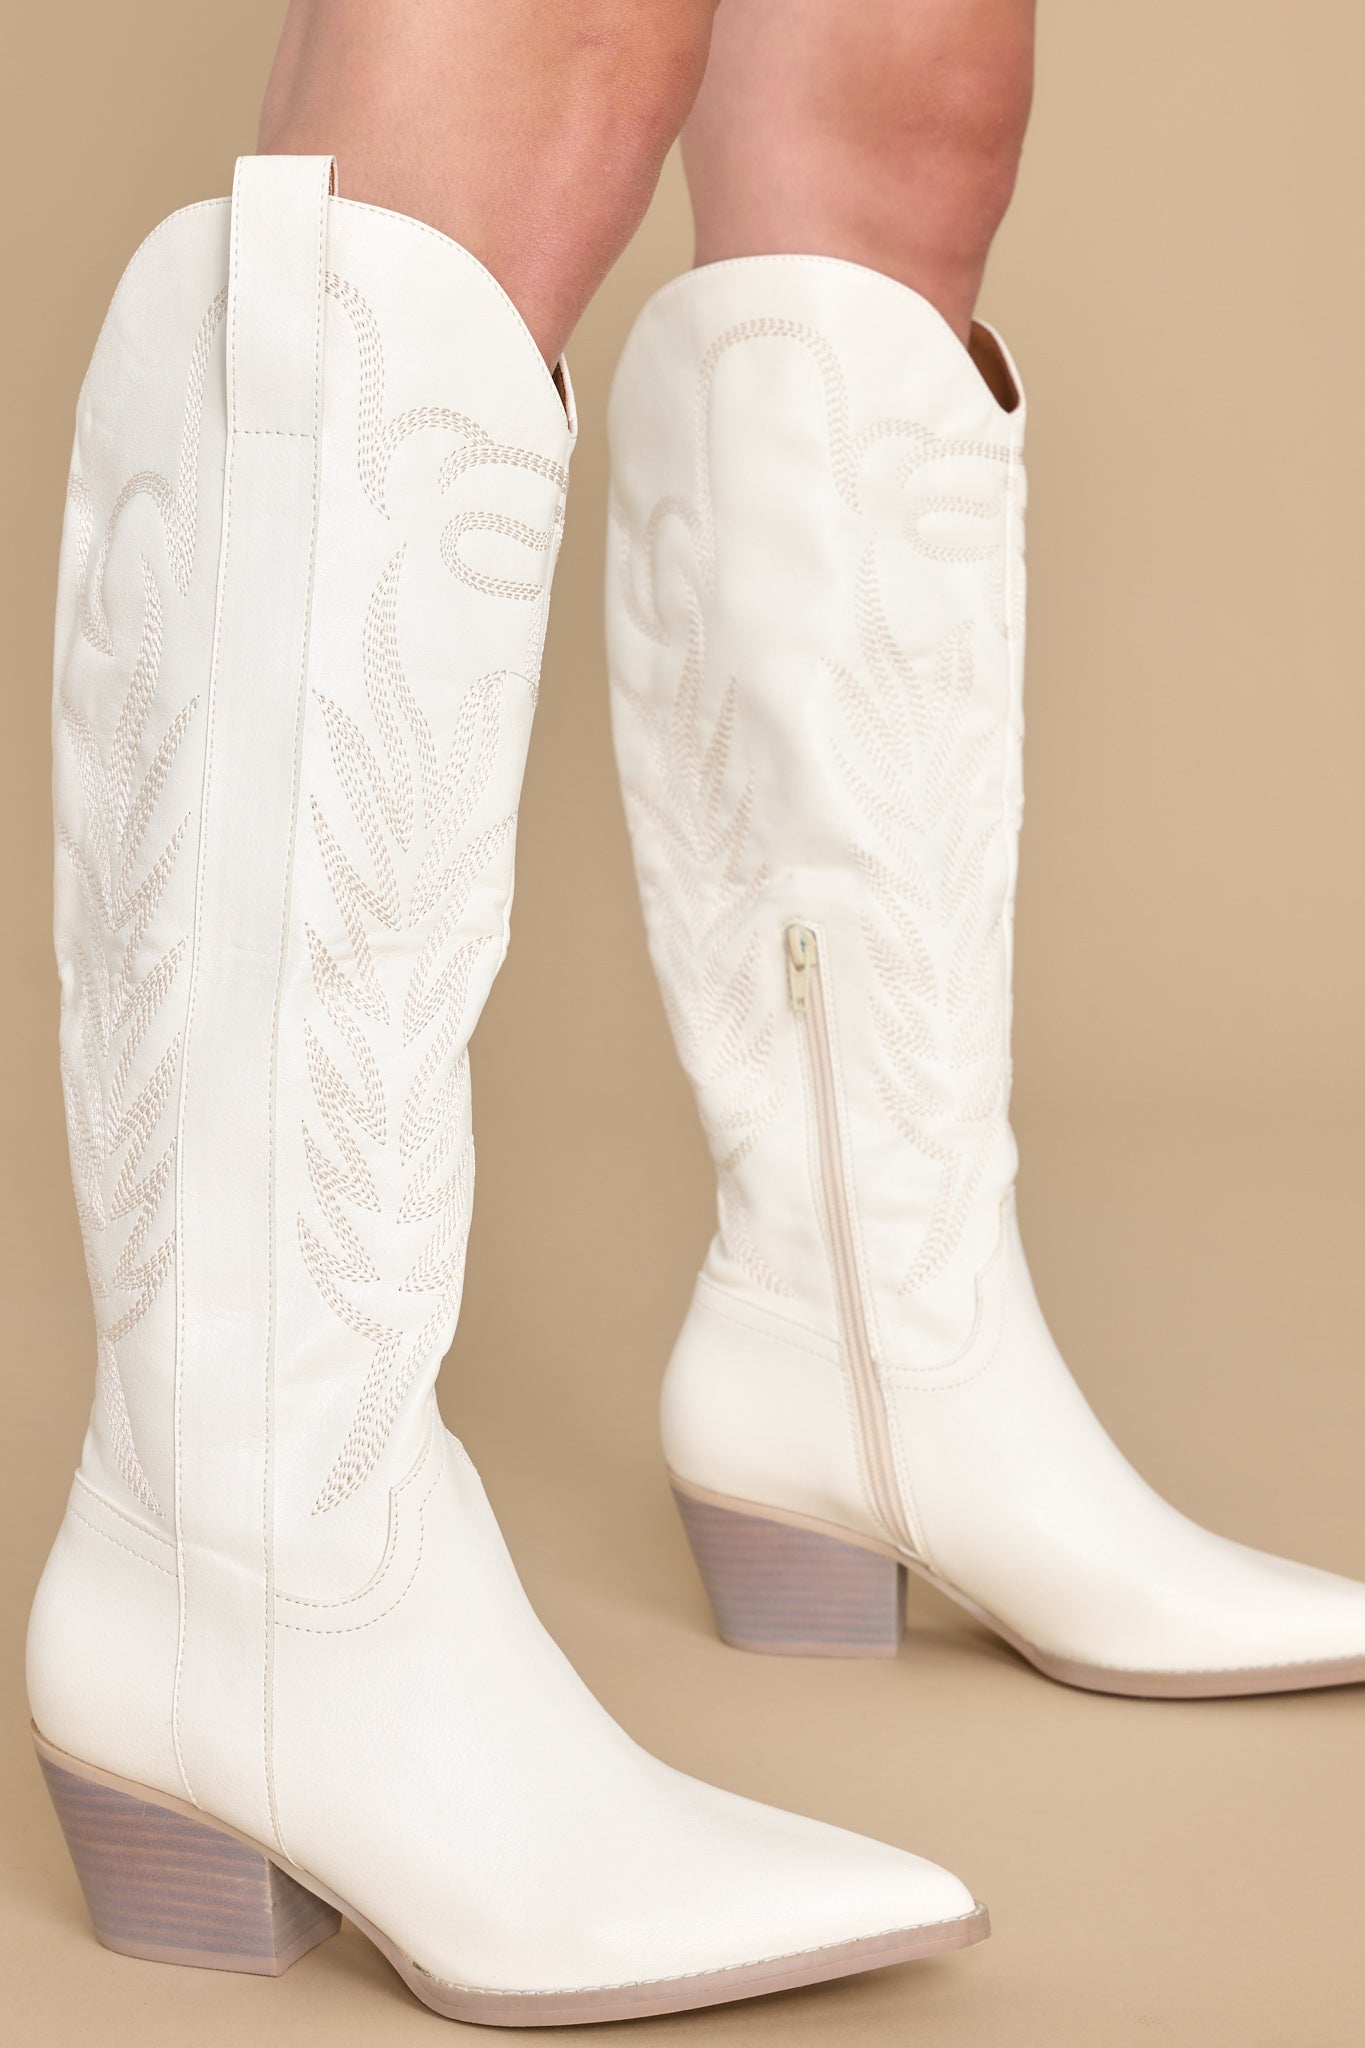 Adorable White Cowgirl Boots - All Shoes